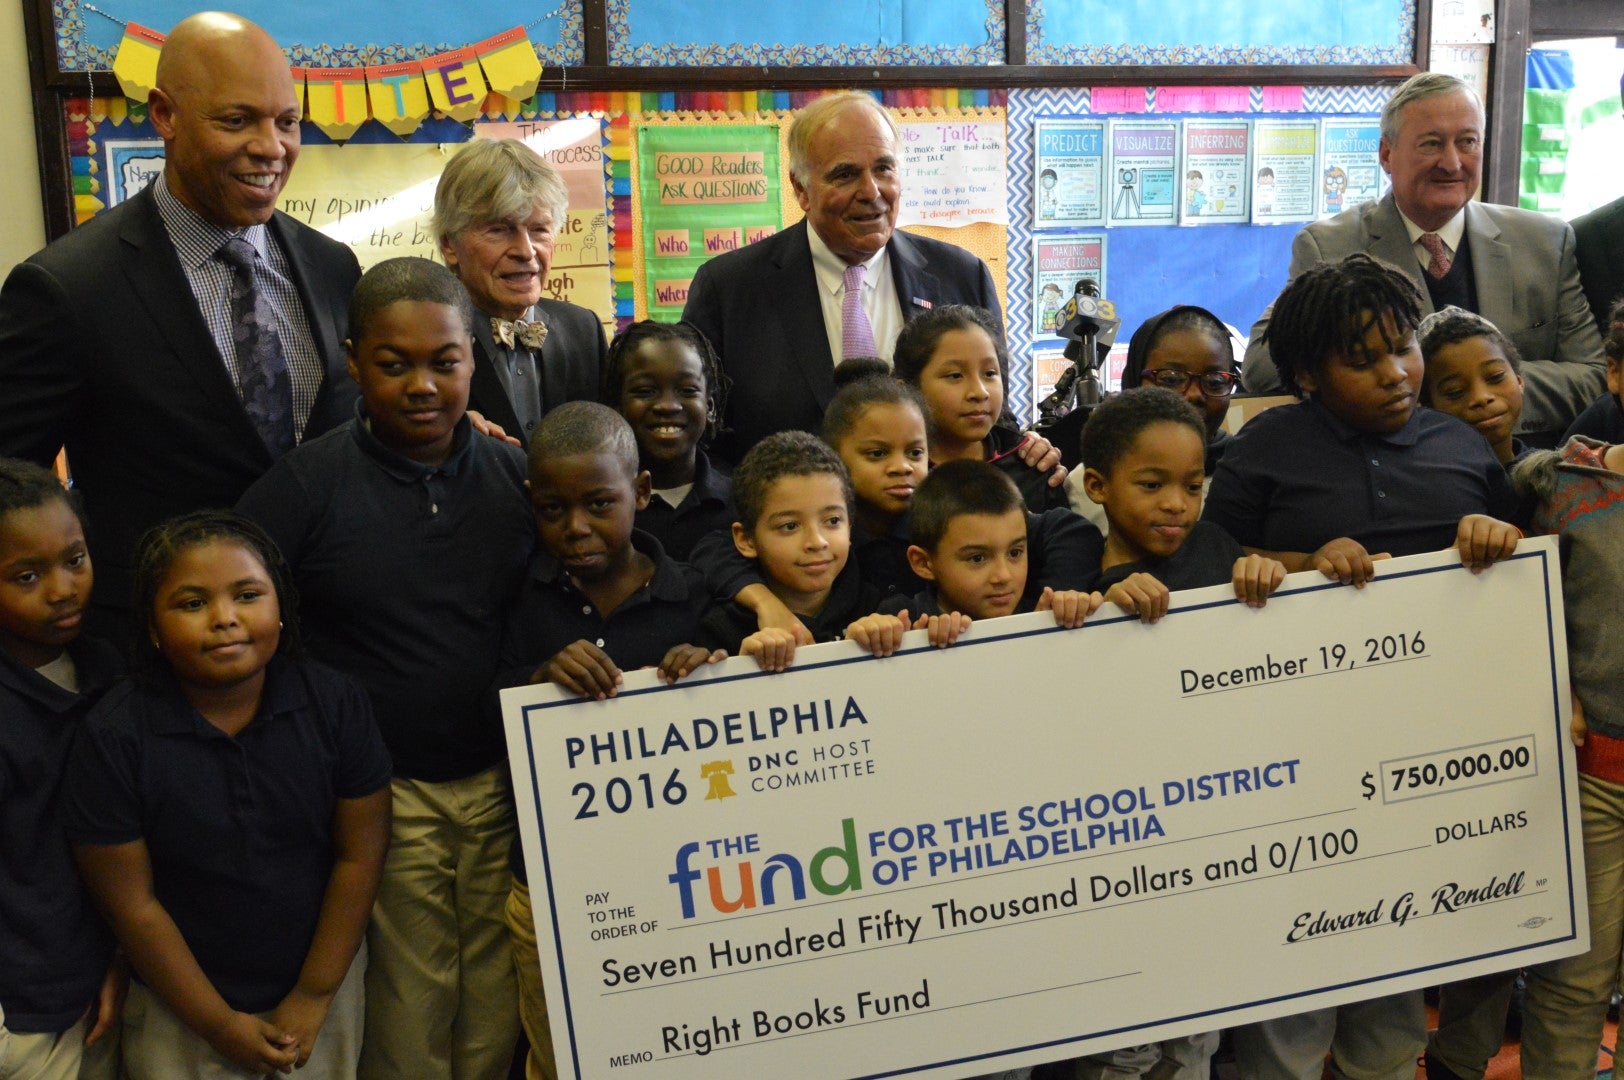 Officials with the Democratic National Committee and the School District of Philadelphia join students in celebrating the $750